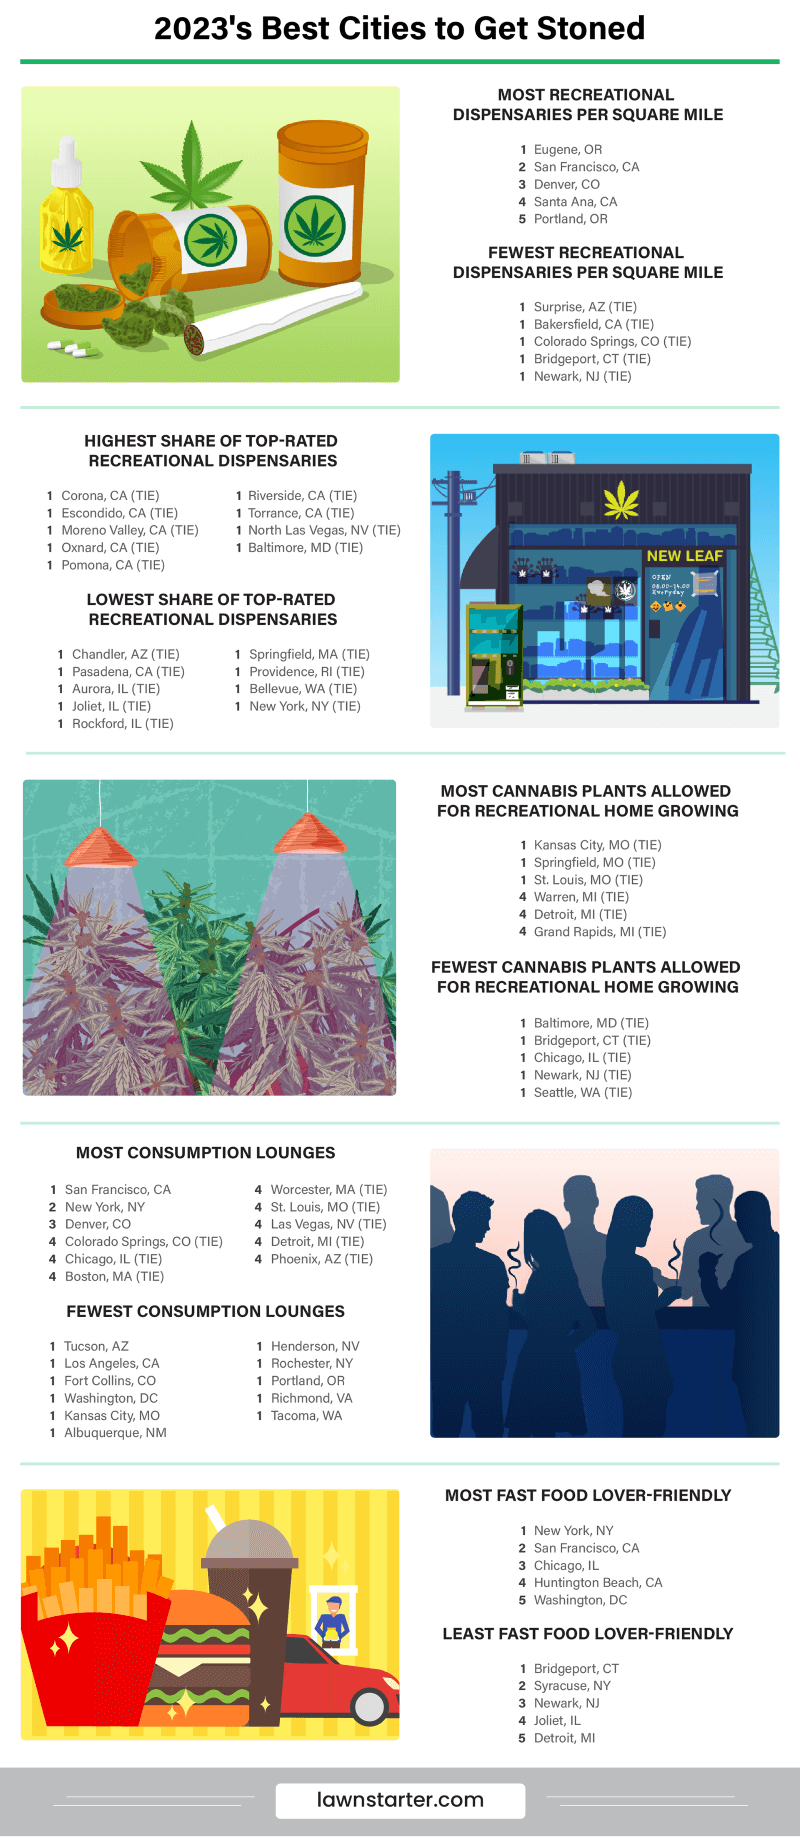 Infographic showing the Best Cities to Get Stoned, a ranking based on cannabis access, consumer satisfaction, consumption lounges, munchie relievers, and more